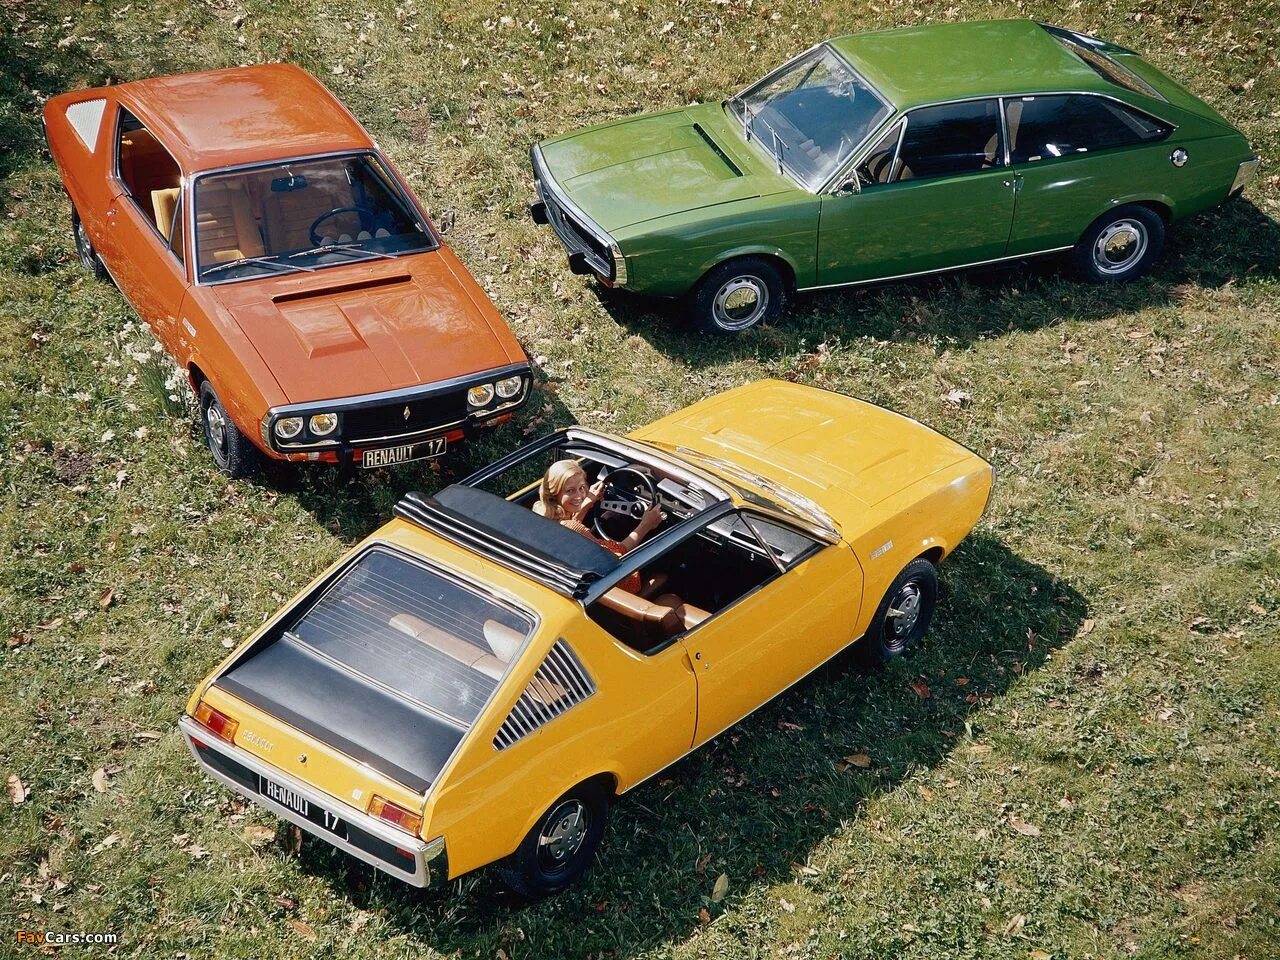 Renault 15 1971. Renault 15 and 17. Renault 17 Fuego. Рено 17 1974. Renault 17